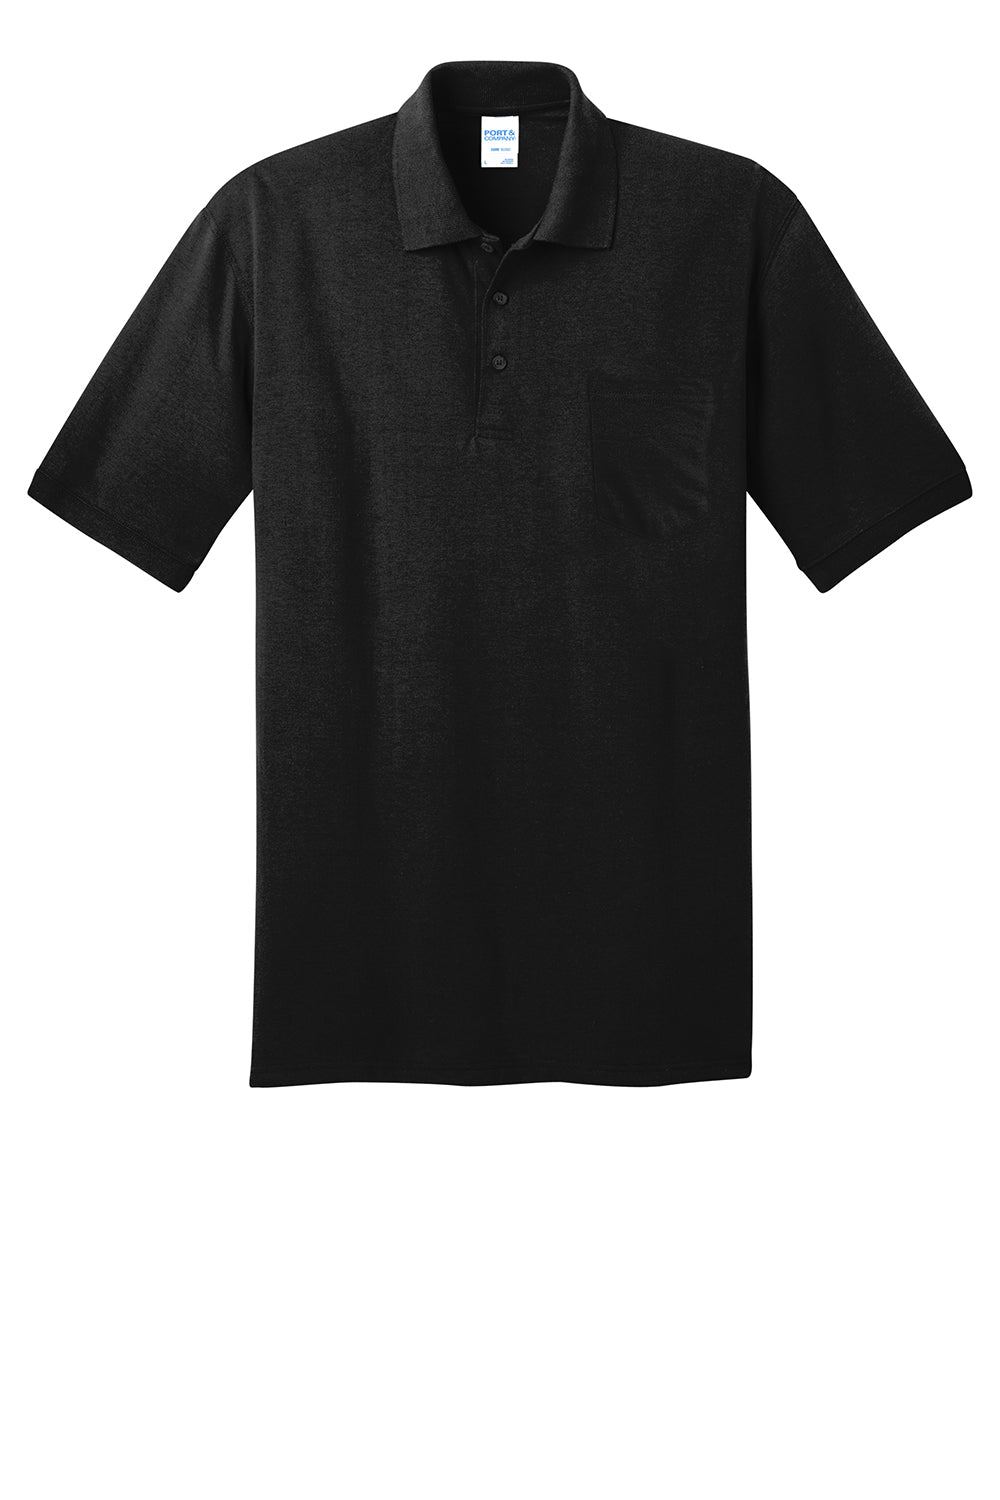 Port & Company KP55P Mens Core Stain Resistant Short Sleeve Polo Shirt w/ Pocket Black Flat Front